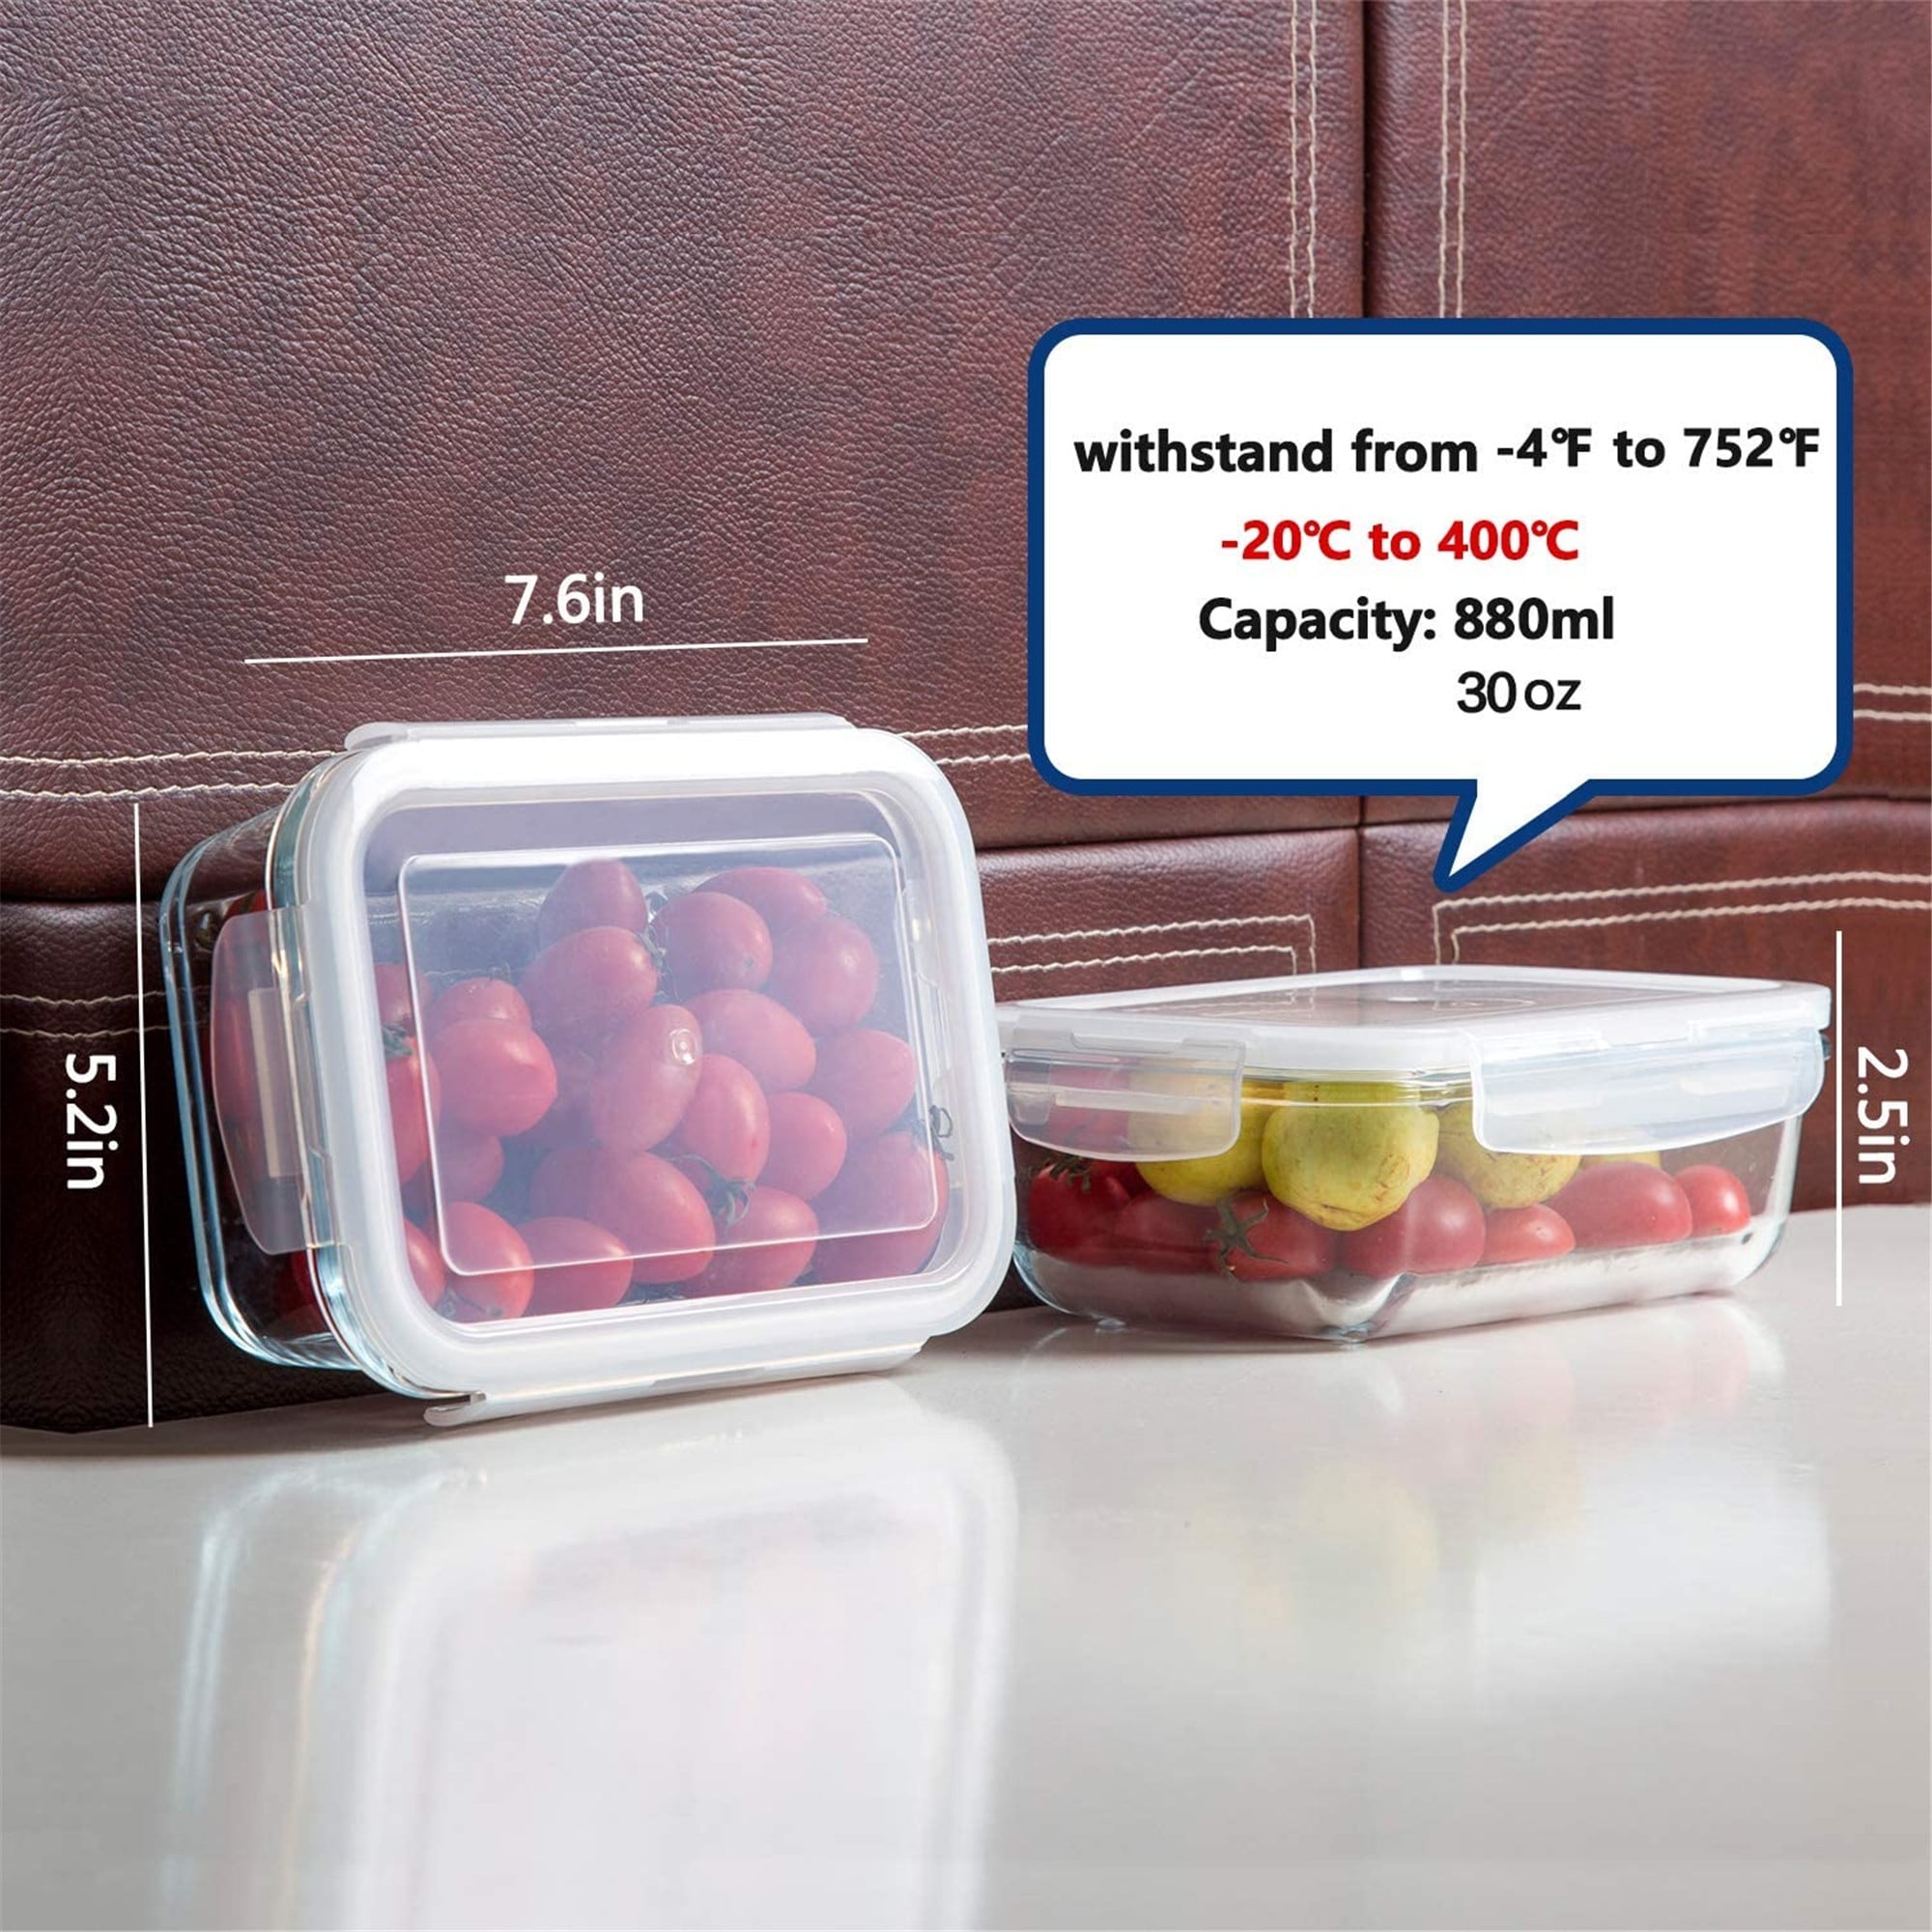 https://ak1.ostkcdn.com/images/products/is/images/direct/f9f197011a681ec3b1b202c42ef793f0b60df1e8/8Pack-Glass-Food-Storage-Containers%2CGlass-Meal-PrepContainers%2C-Airtight-GlassStorage-Containers-with-LidsBPAFree-Leak-Proof30oz.jpg